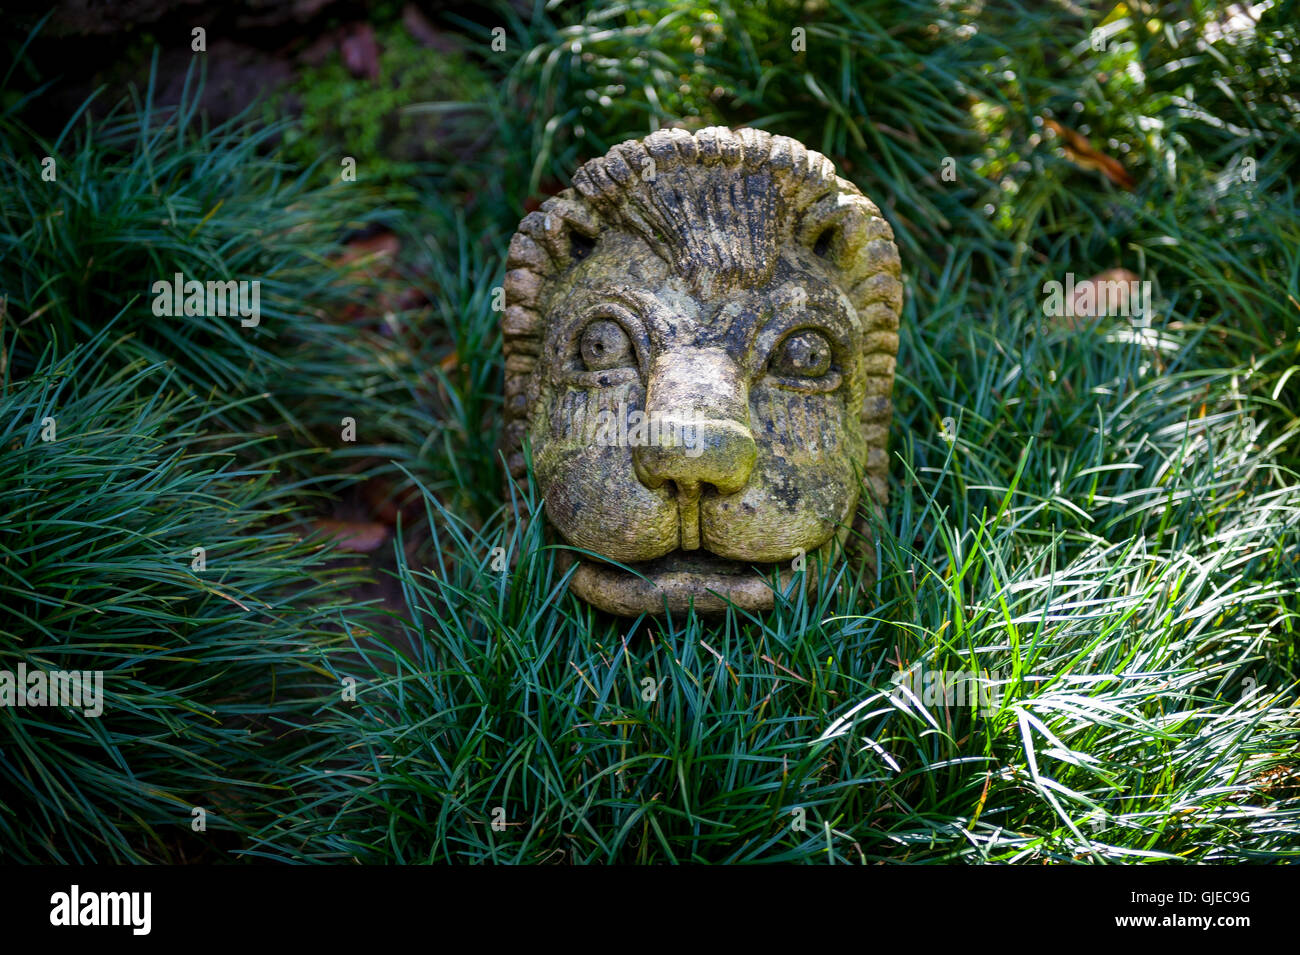 Lion face sculpture in the Monte touristic garden of Funchal. Stock Photo